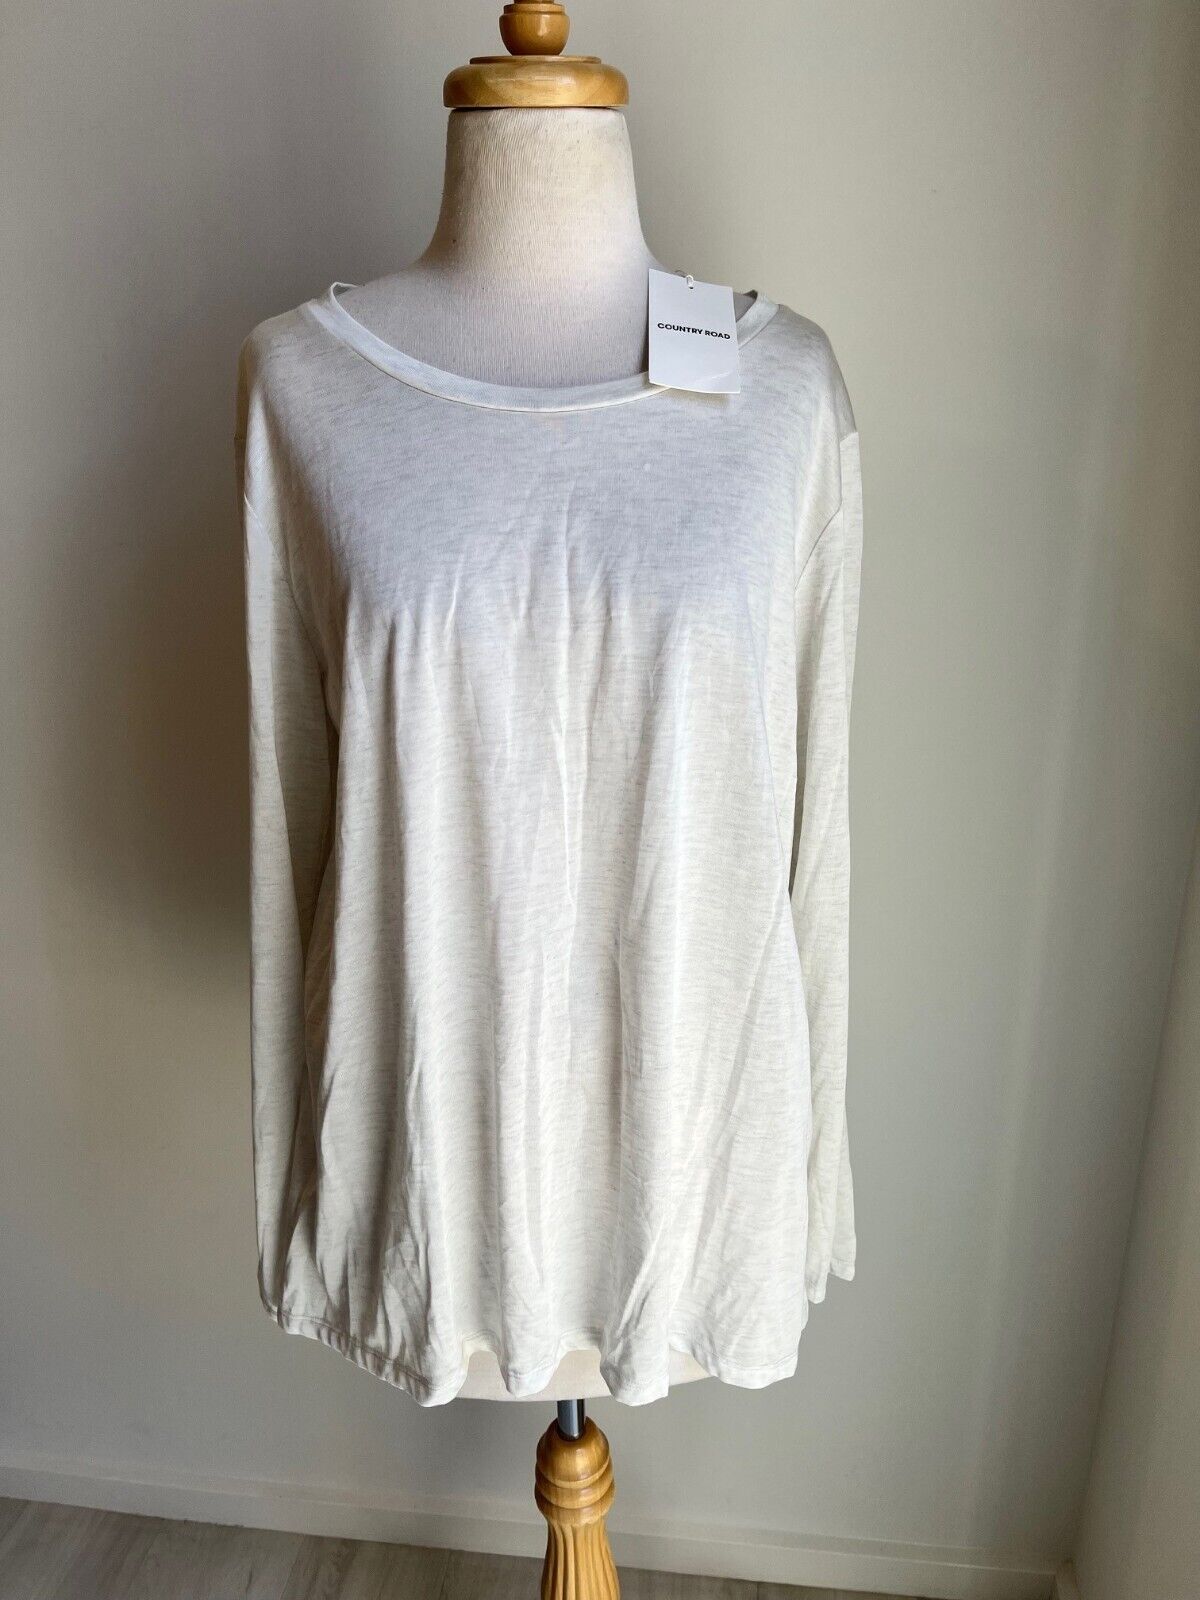 Country Road Ladies Grey Long Sleeve Casual Top Size XL New w Tags RRP $70